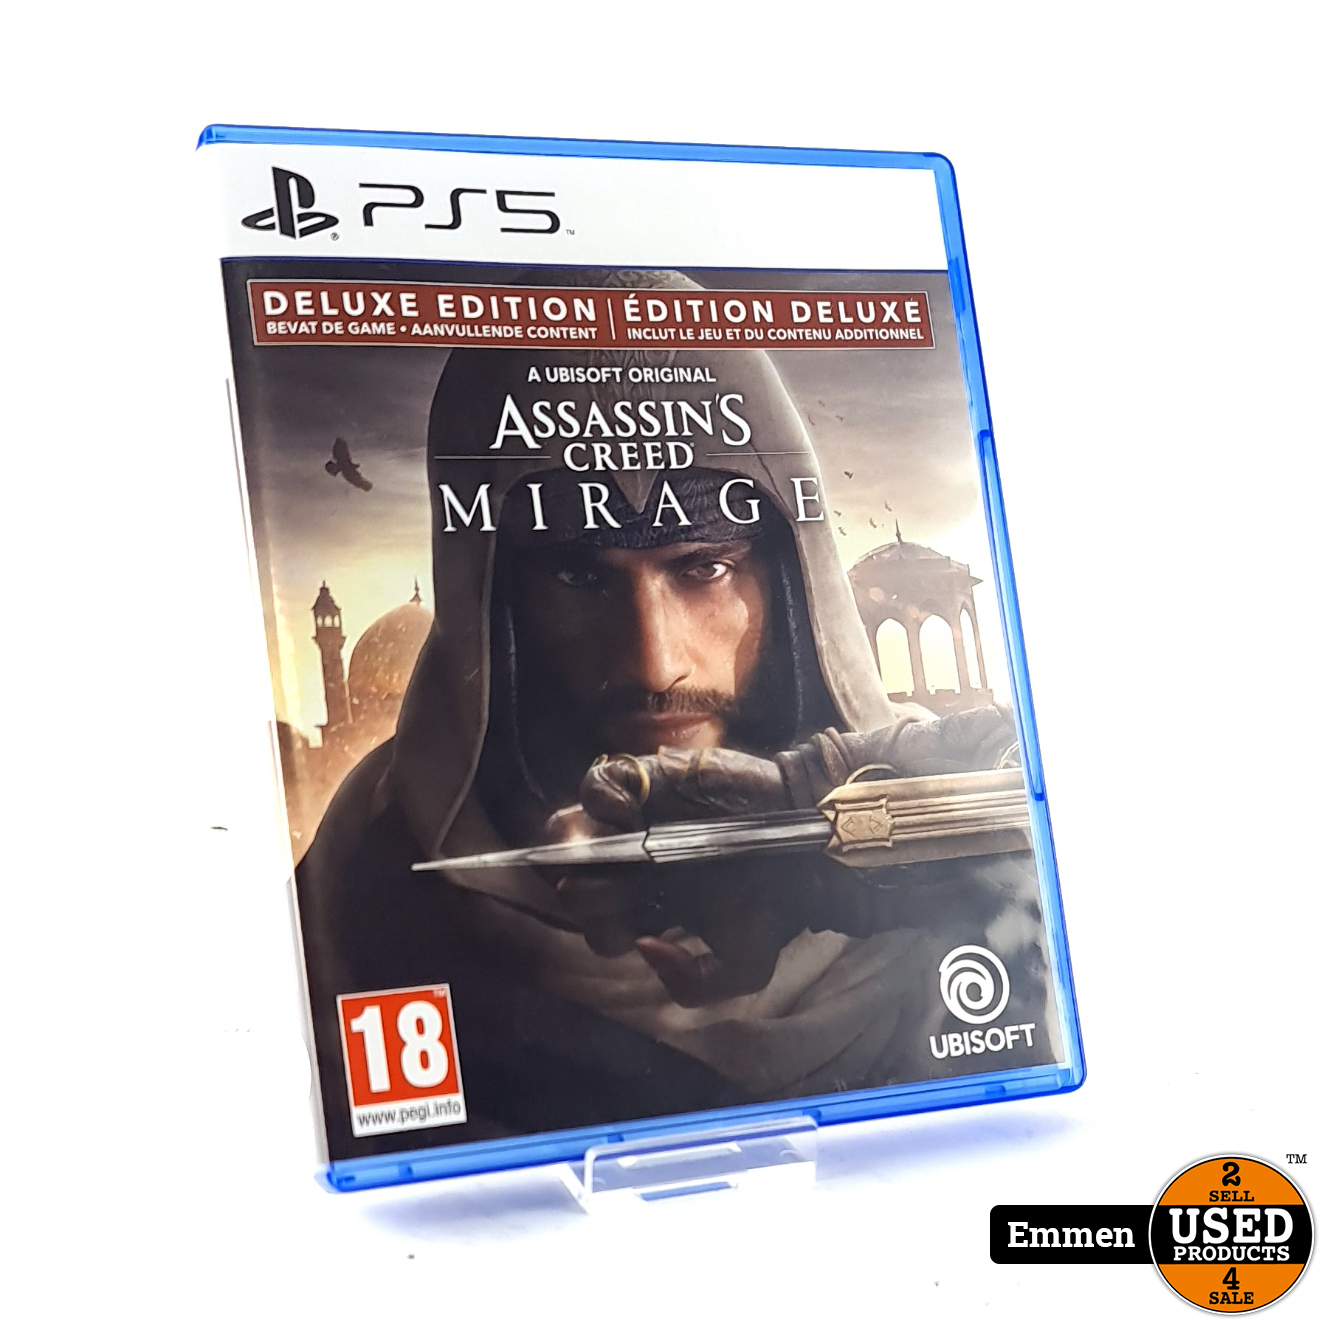 ASSASSIN'S CREED MIRAGE - DELUXE EDITION, PLAYSTATION 5